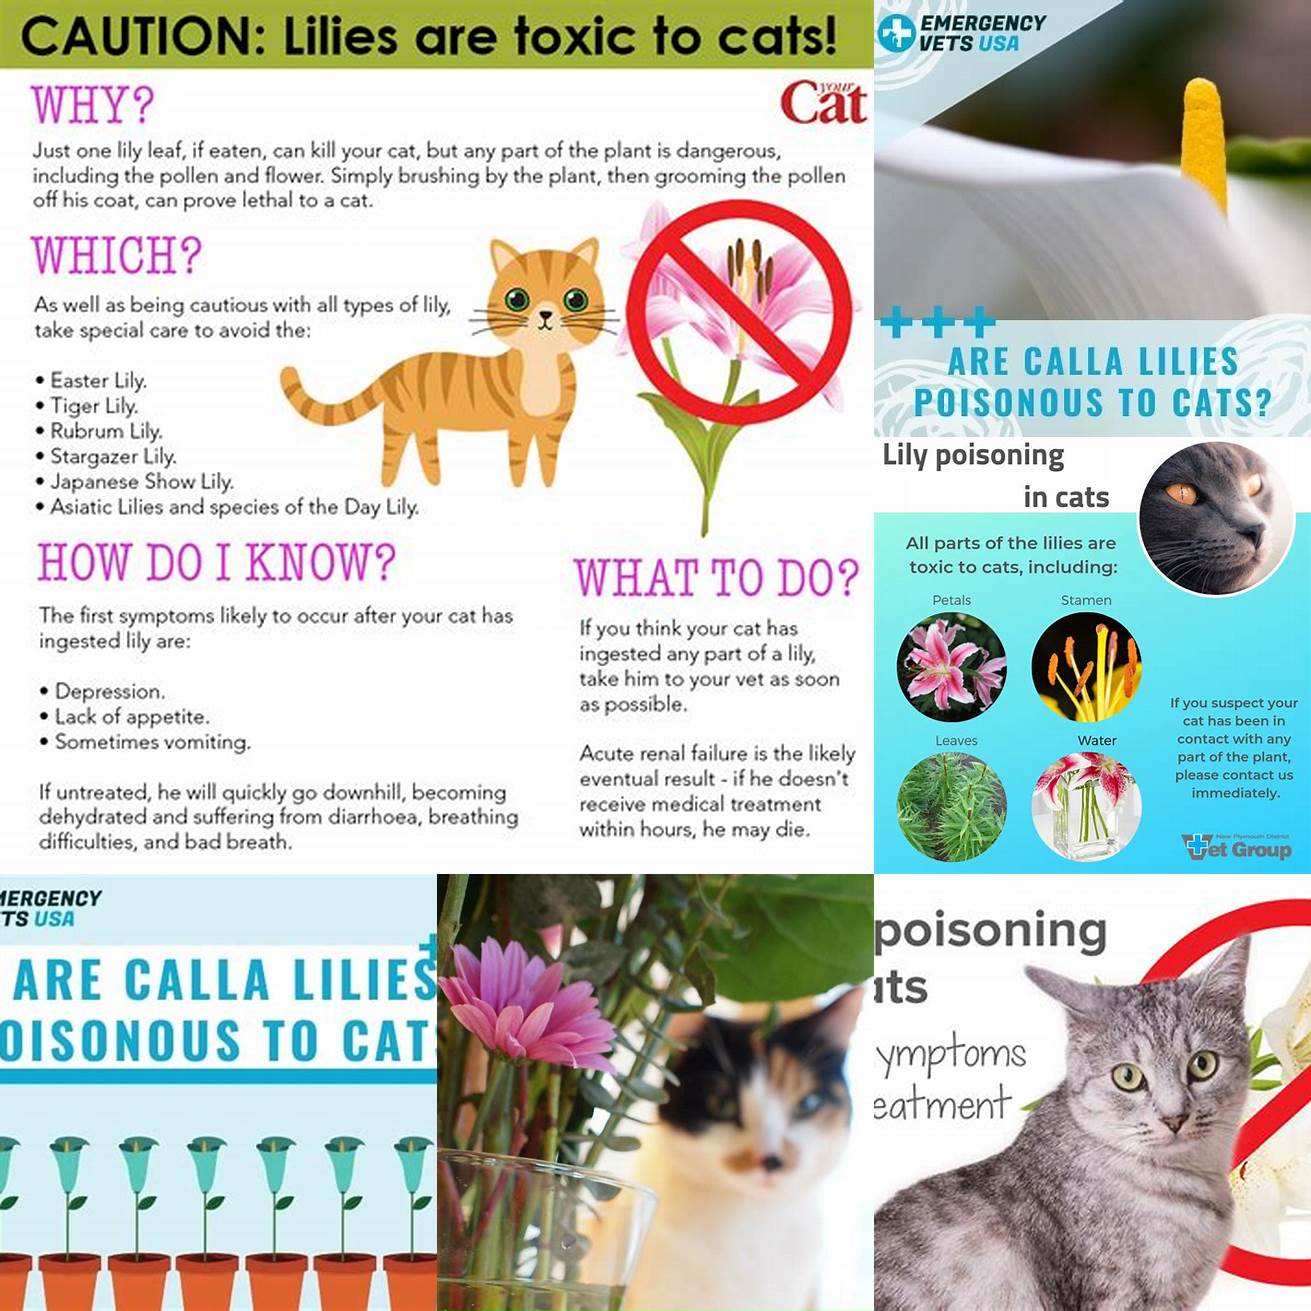 Q What are the symptoms of calla lily poisoning in cats